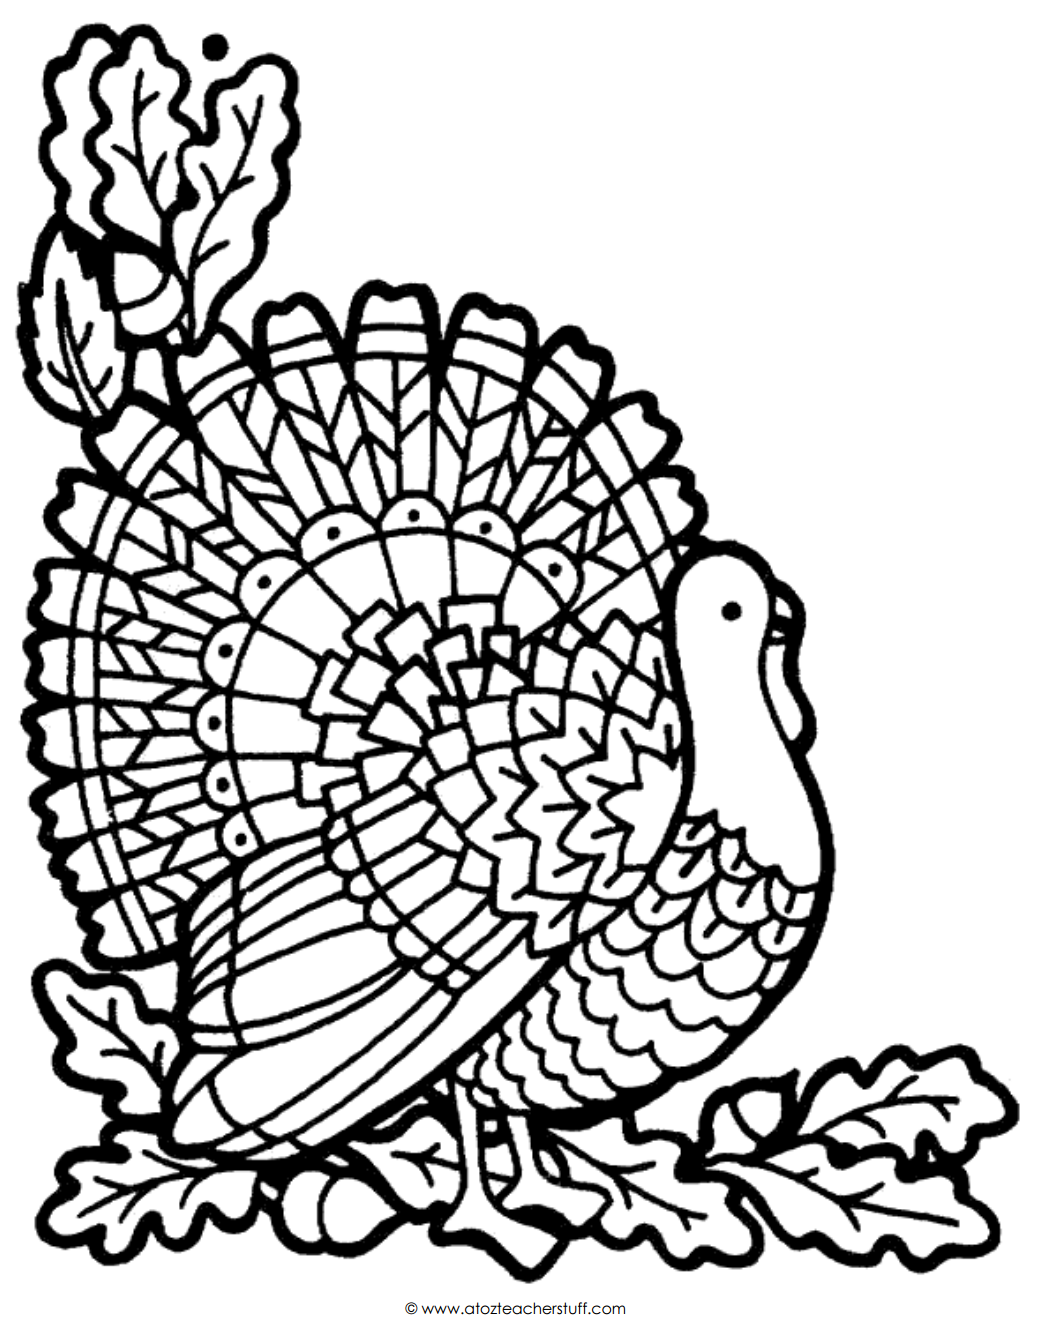 Coloring Book : Free Thanksgiving Turkey Coloring Page Pages ...